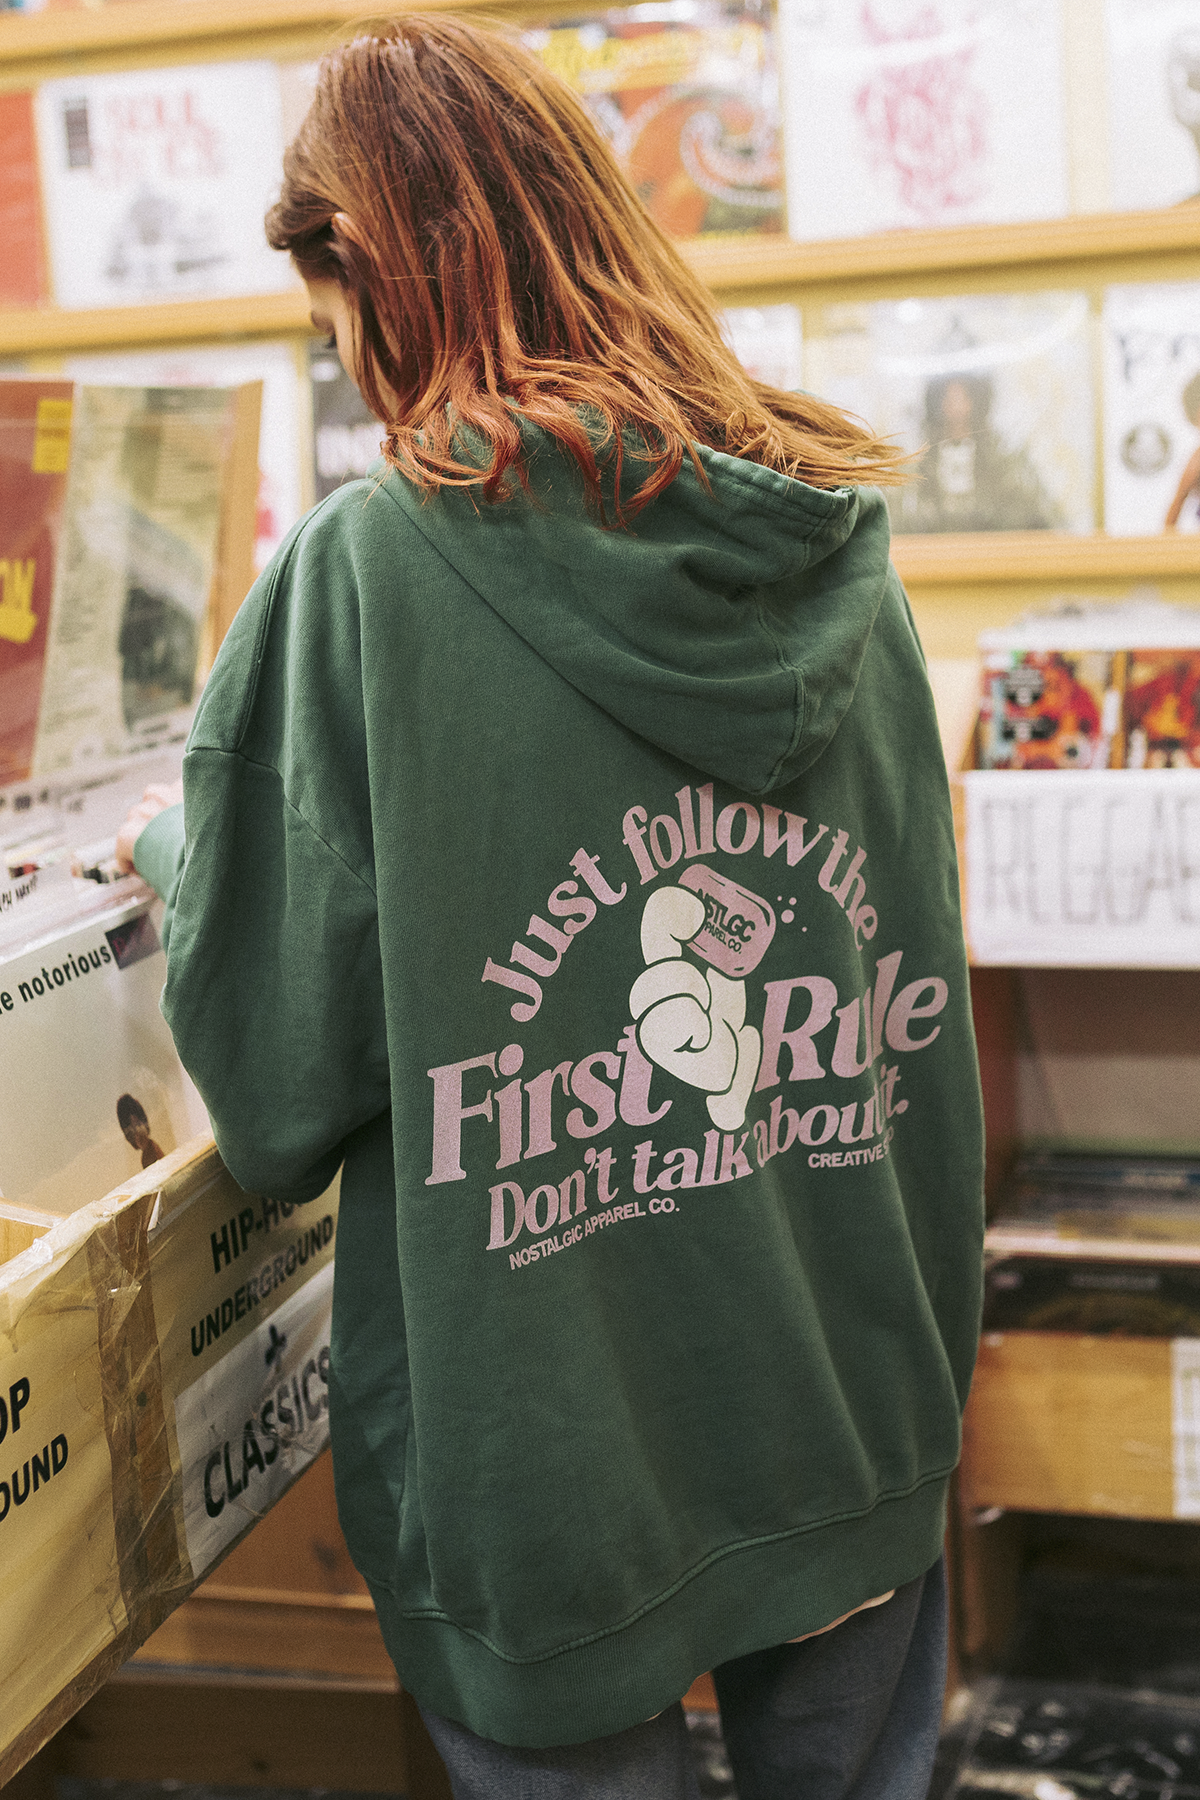 First Rule | Oversized Hoodie